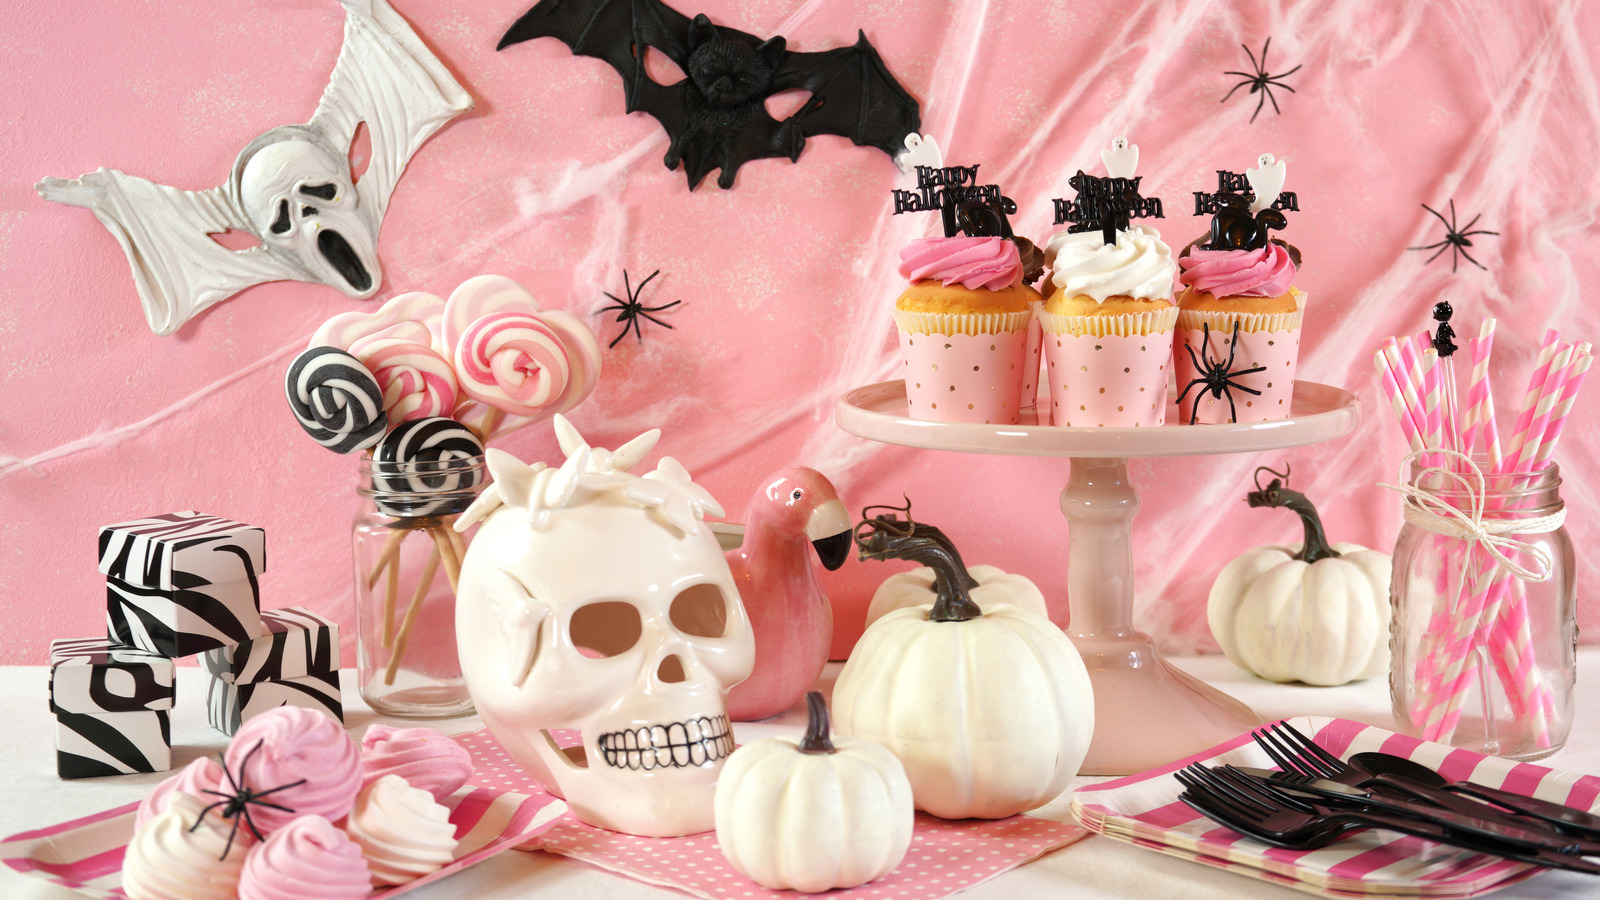 https://www.housedigest.com/img/gallery/the-pink-halloween-trend-is-taking-over-tiktok-and-we-cant-get-enough-of-it/l-intro-1693422361.jpg